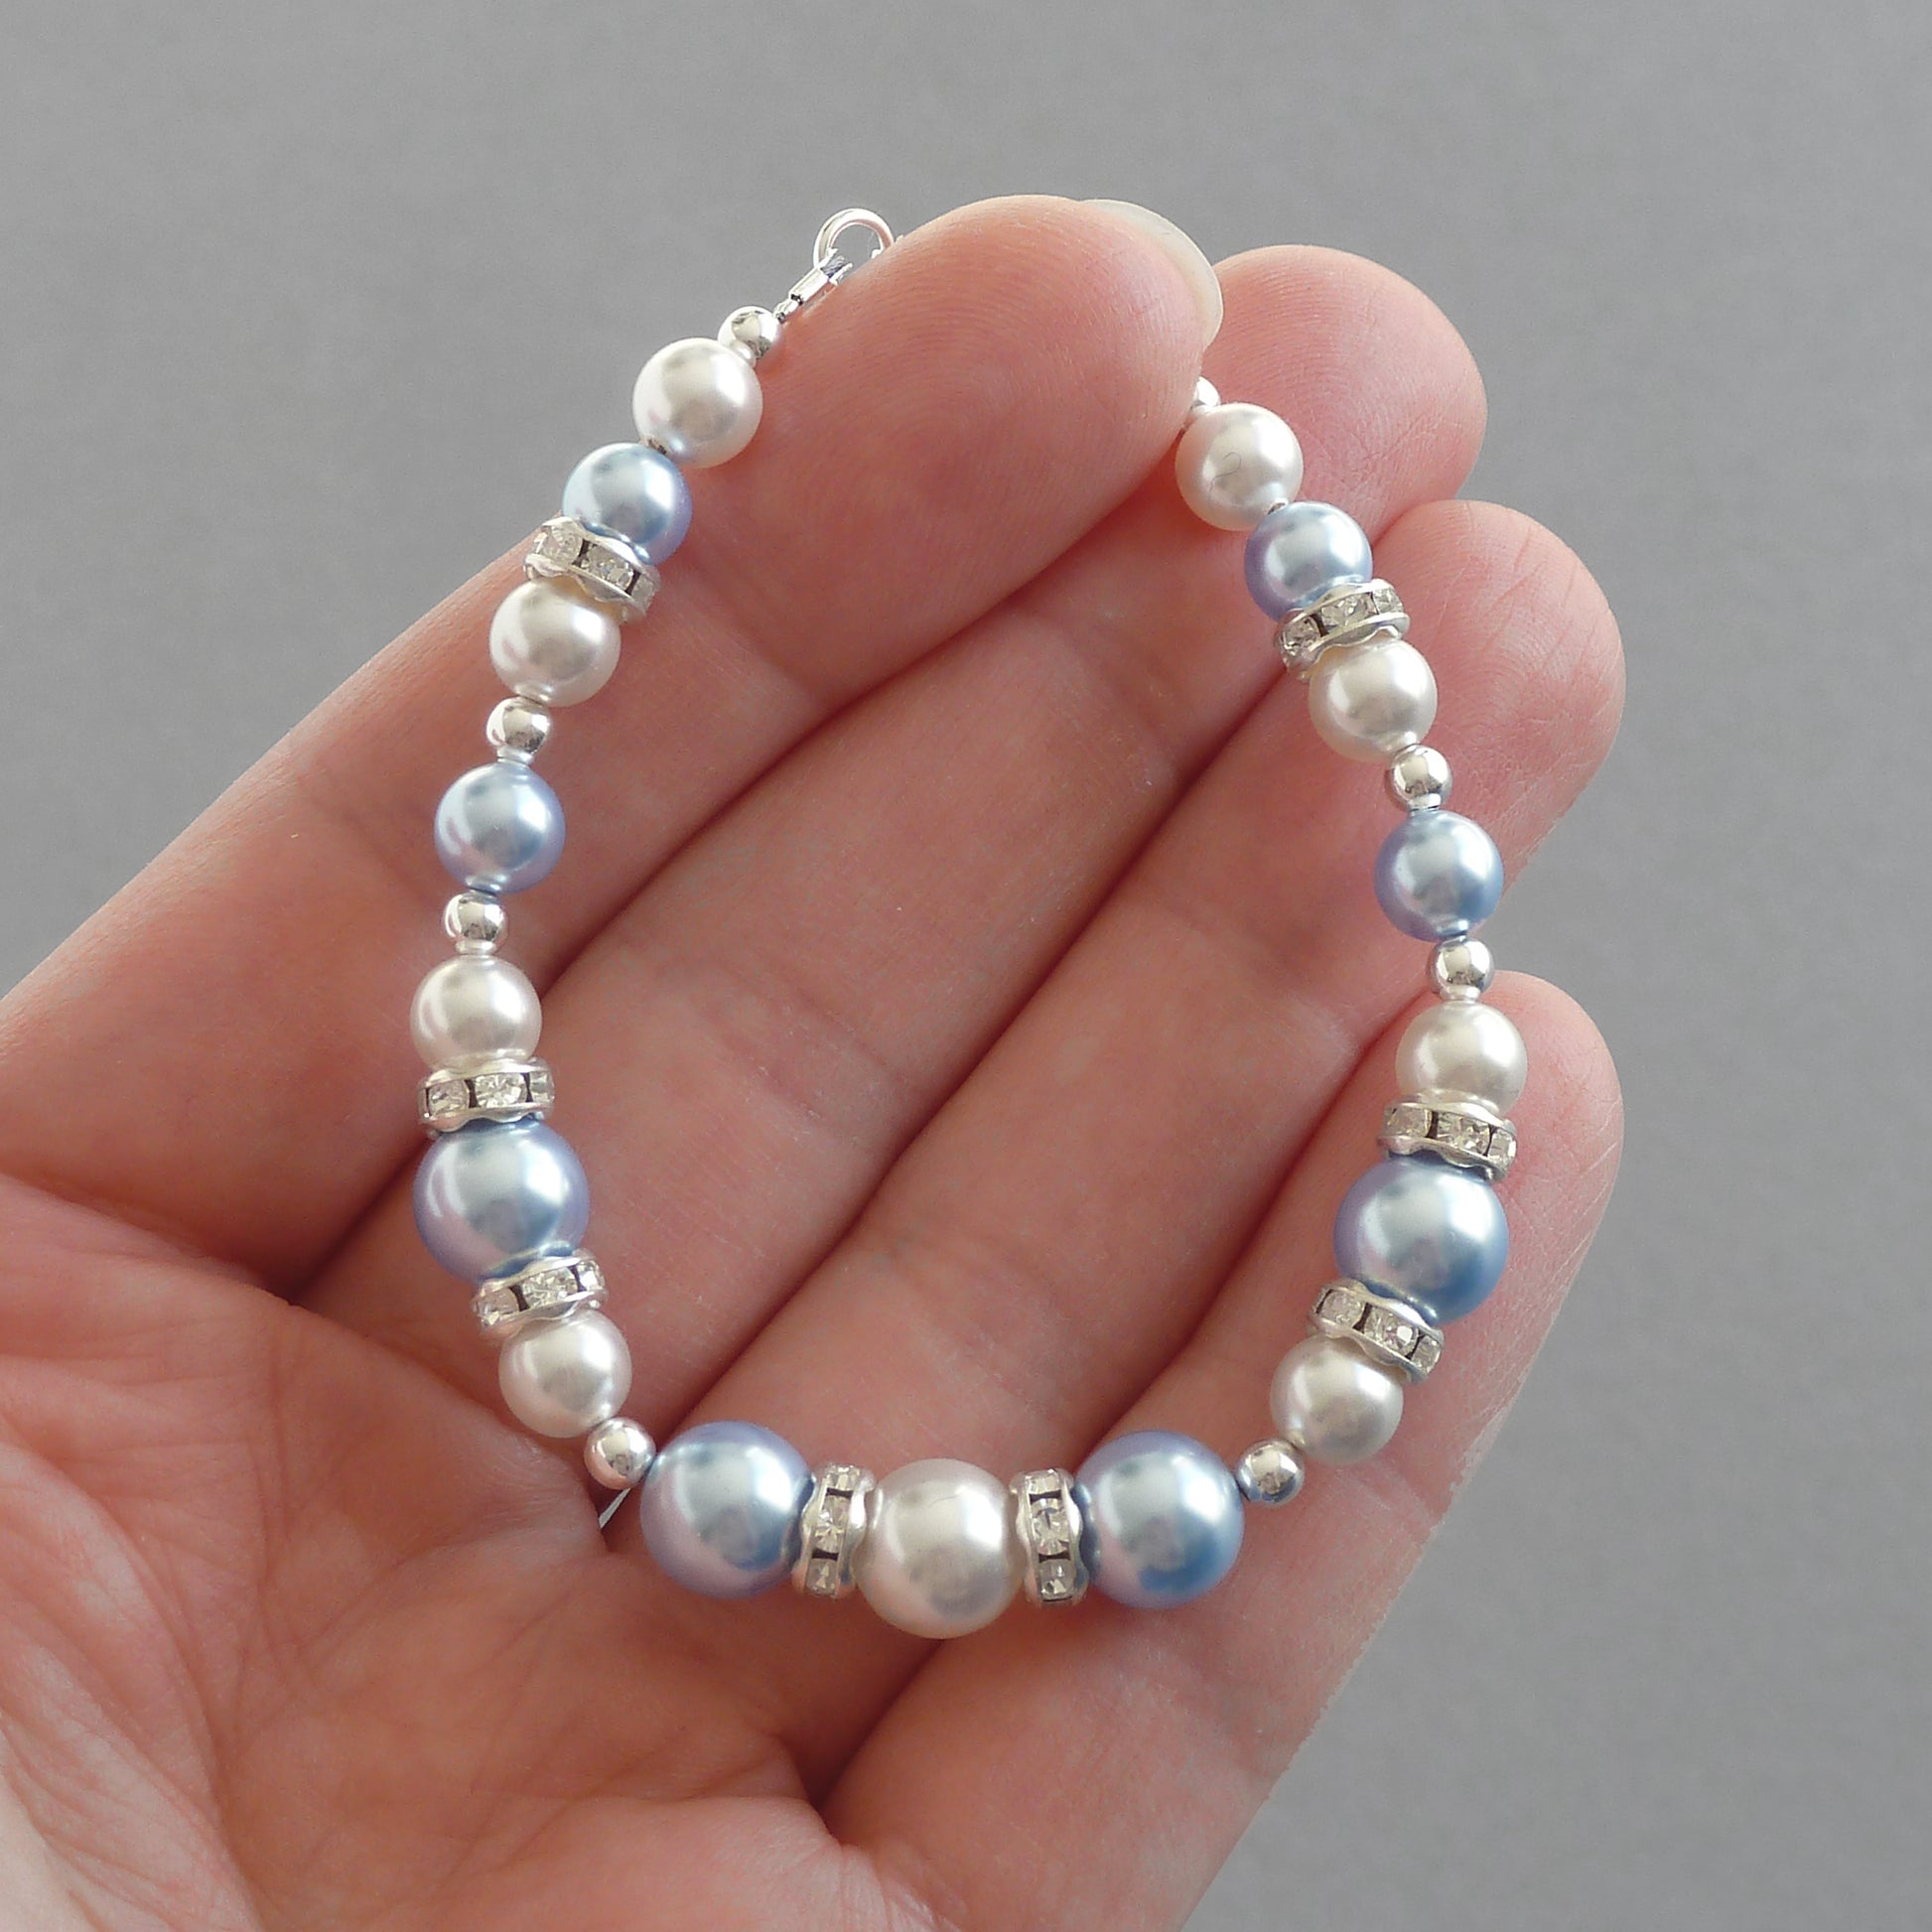 Pale blue and white pearl bracelet